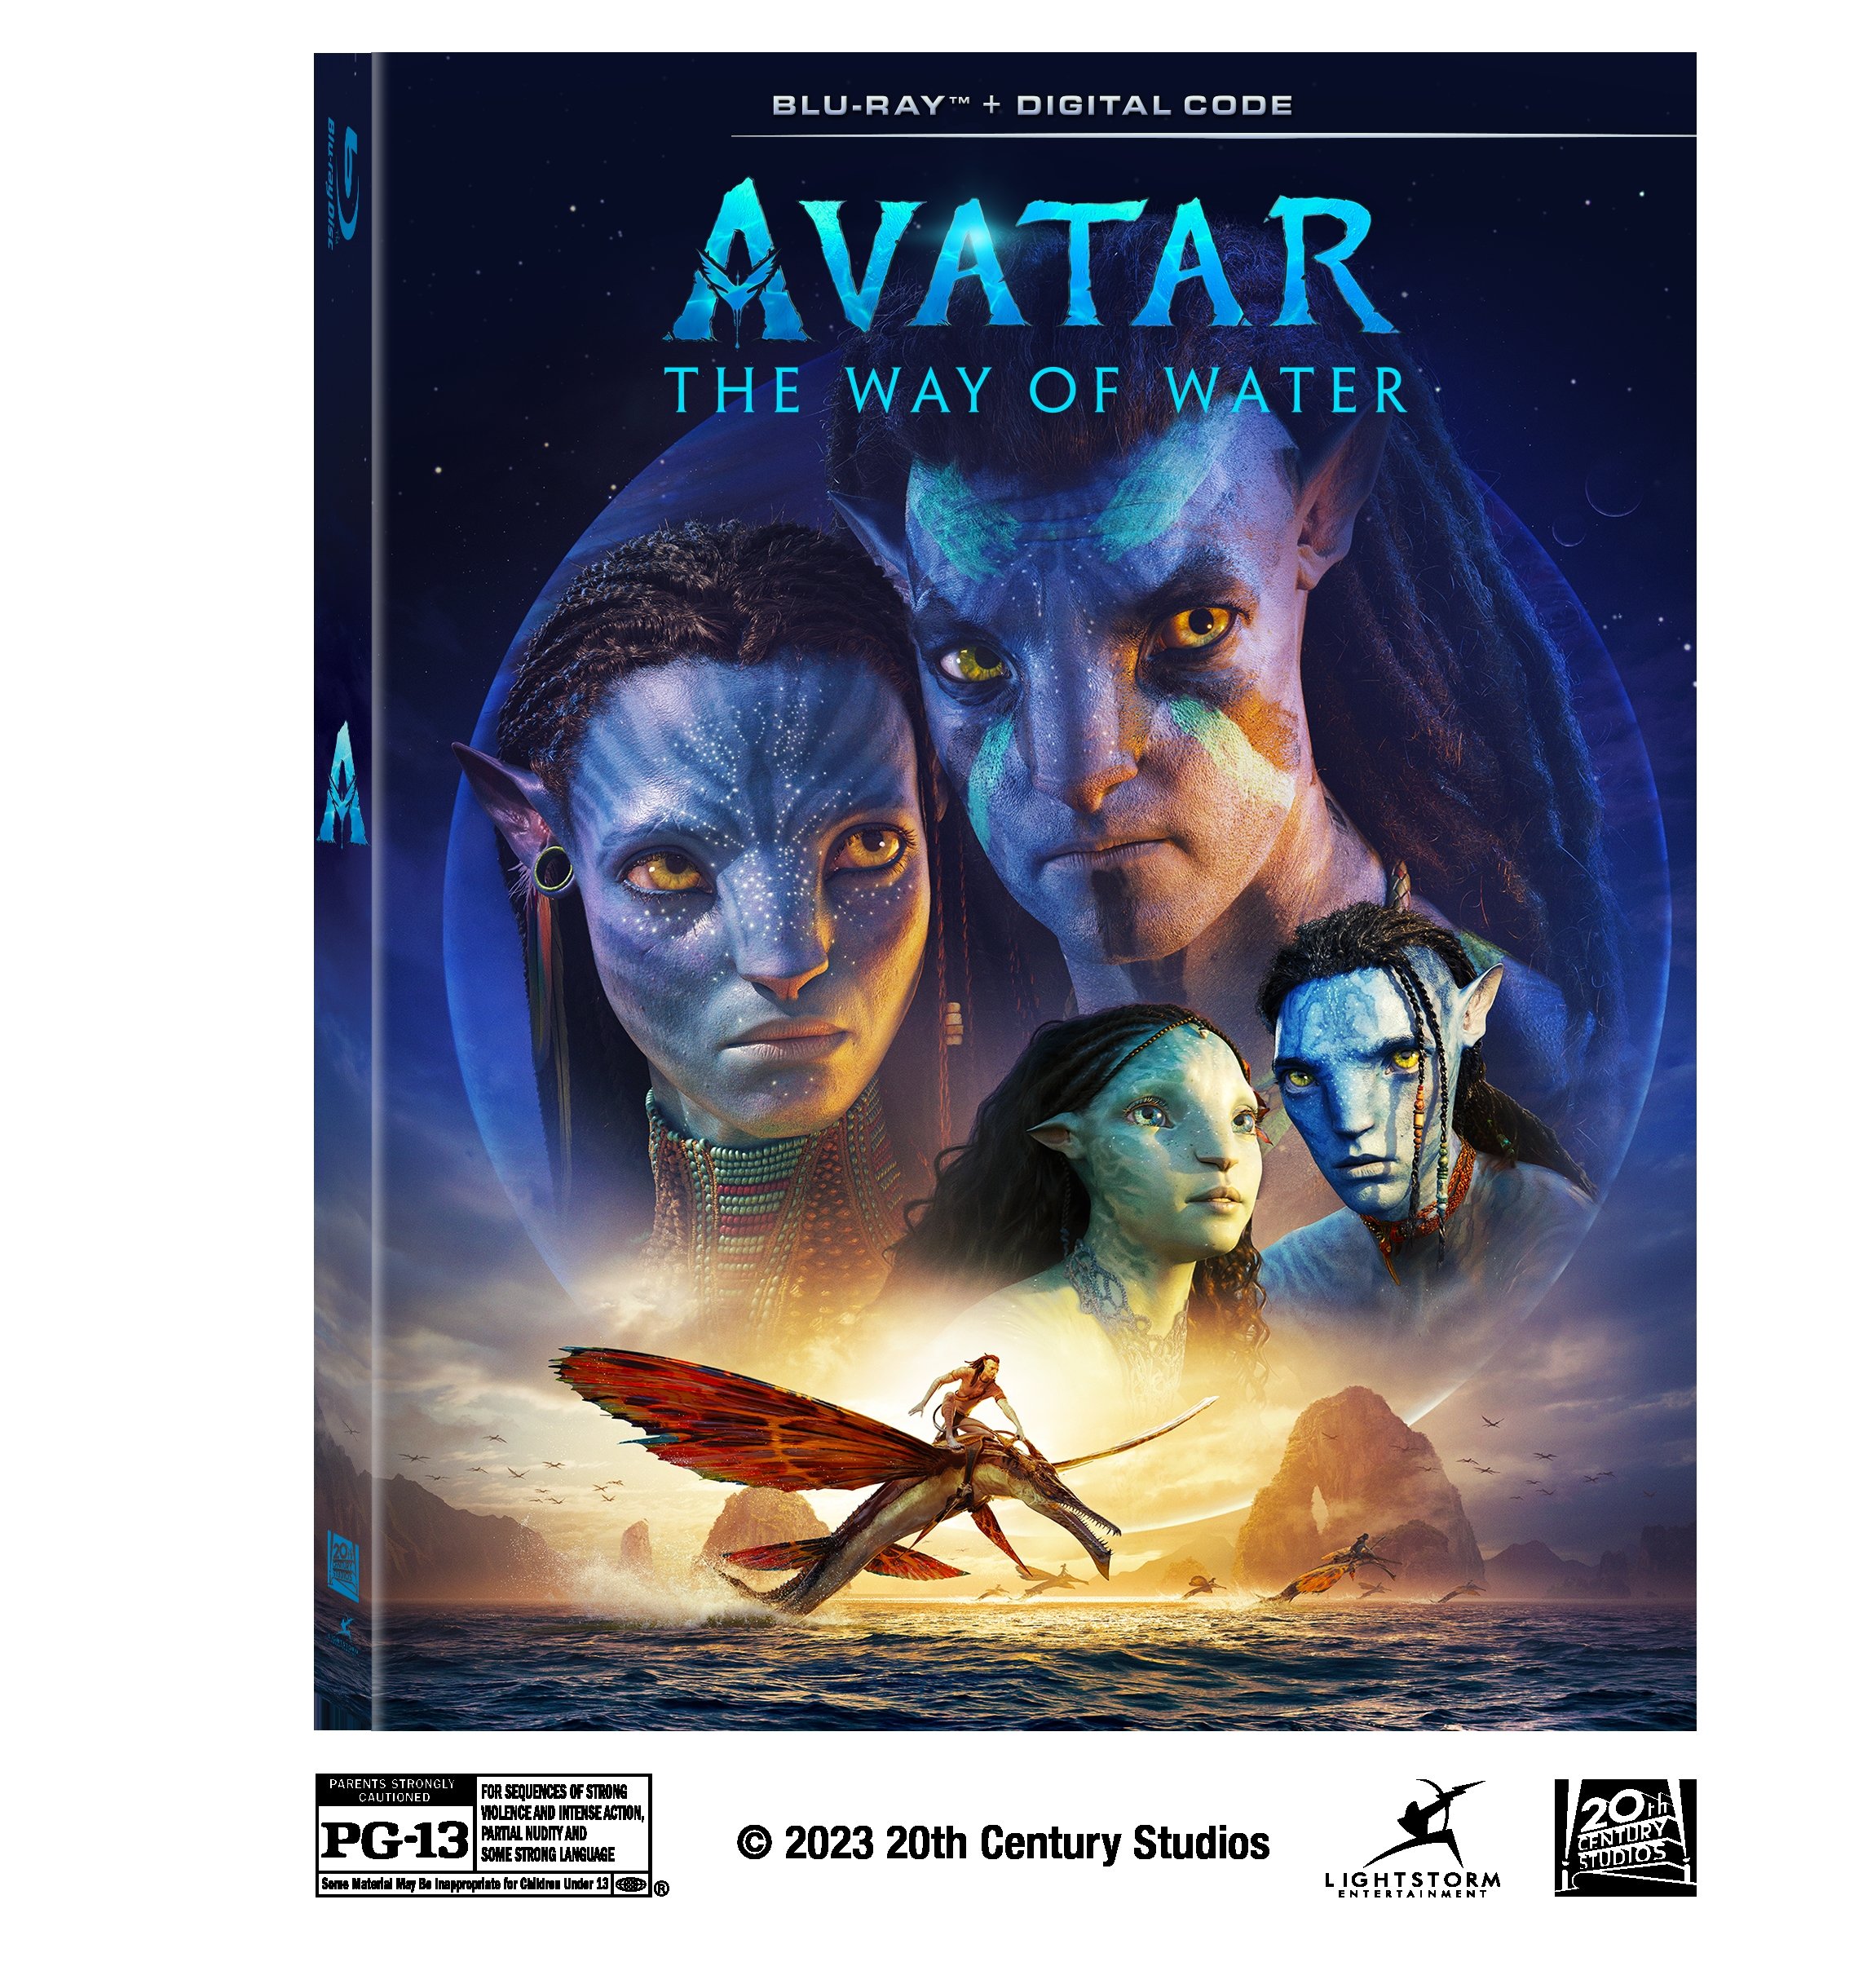 Avatar The Abyss and Titanic got listed for a 4K UHD BluRay Release in  Germany  r4kbluray